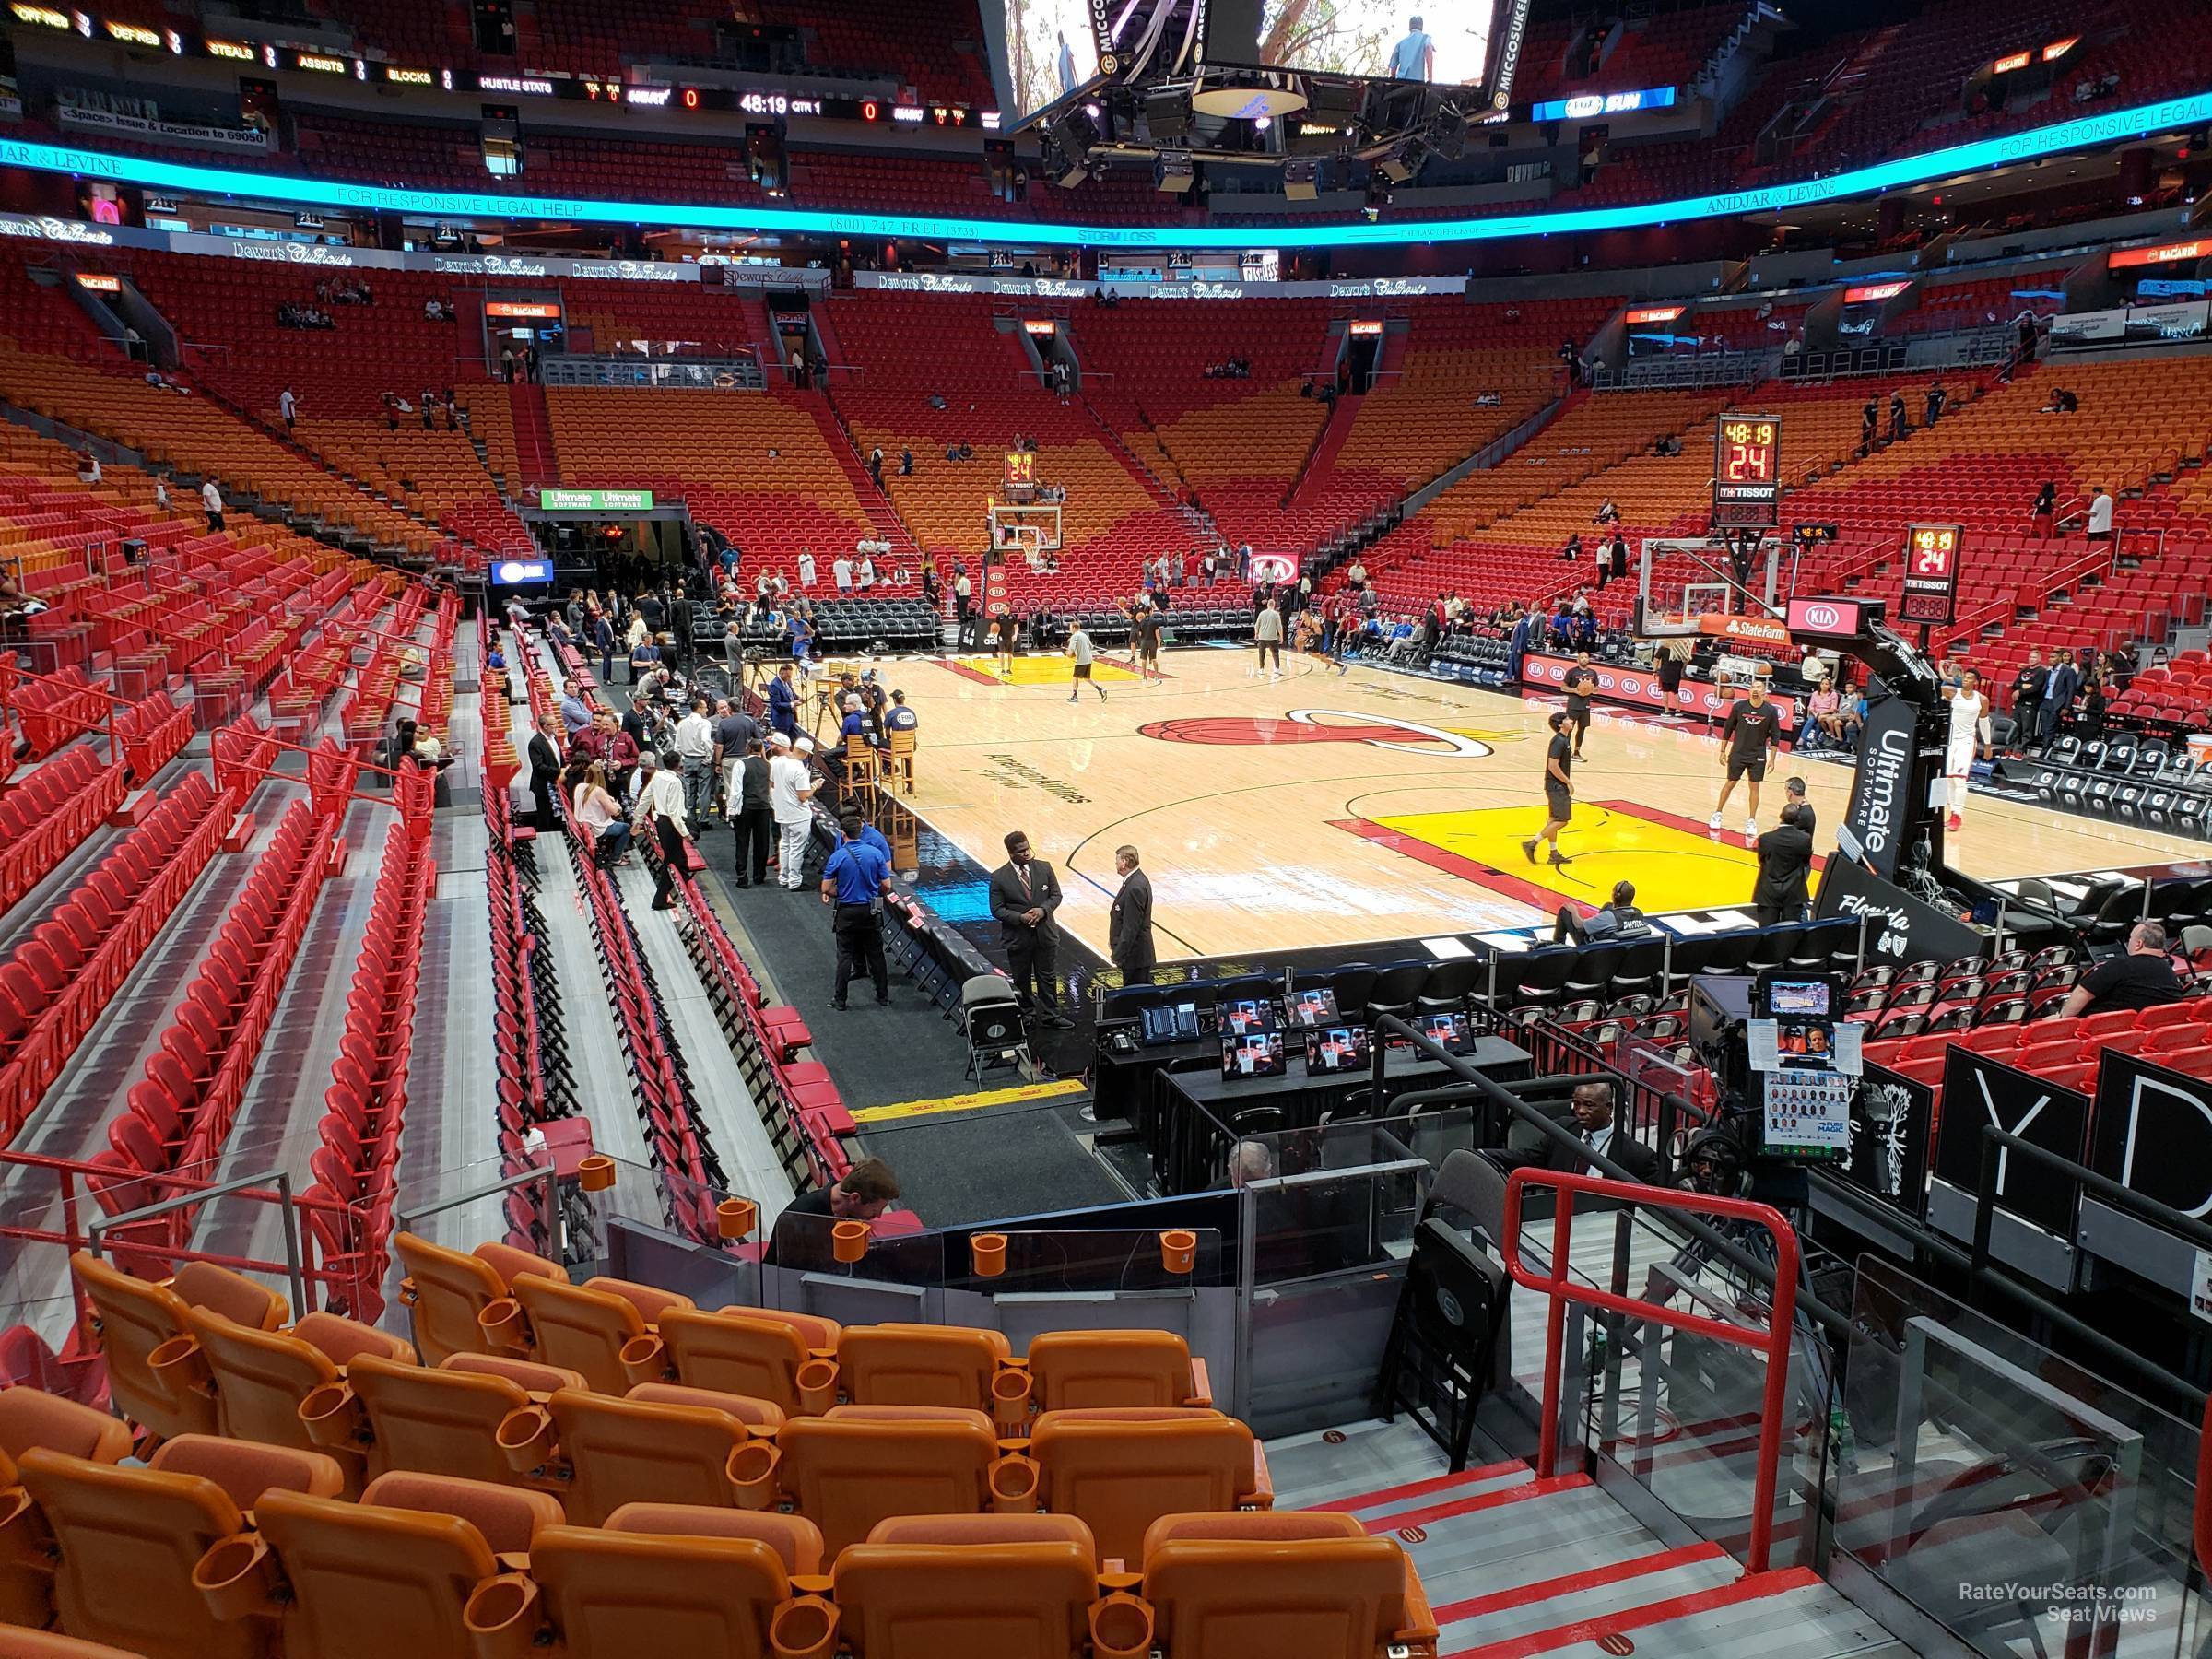 section 114 at americanairlines arena - miami heat